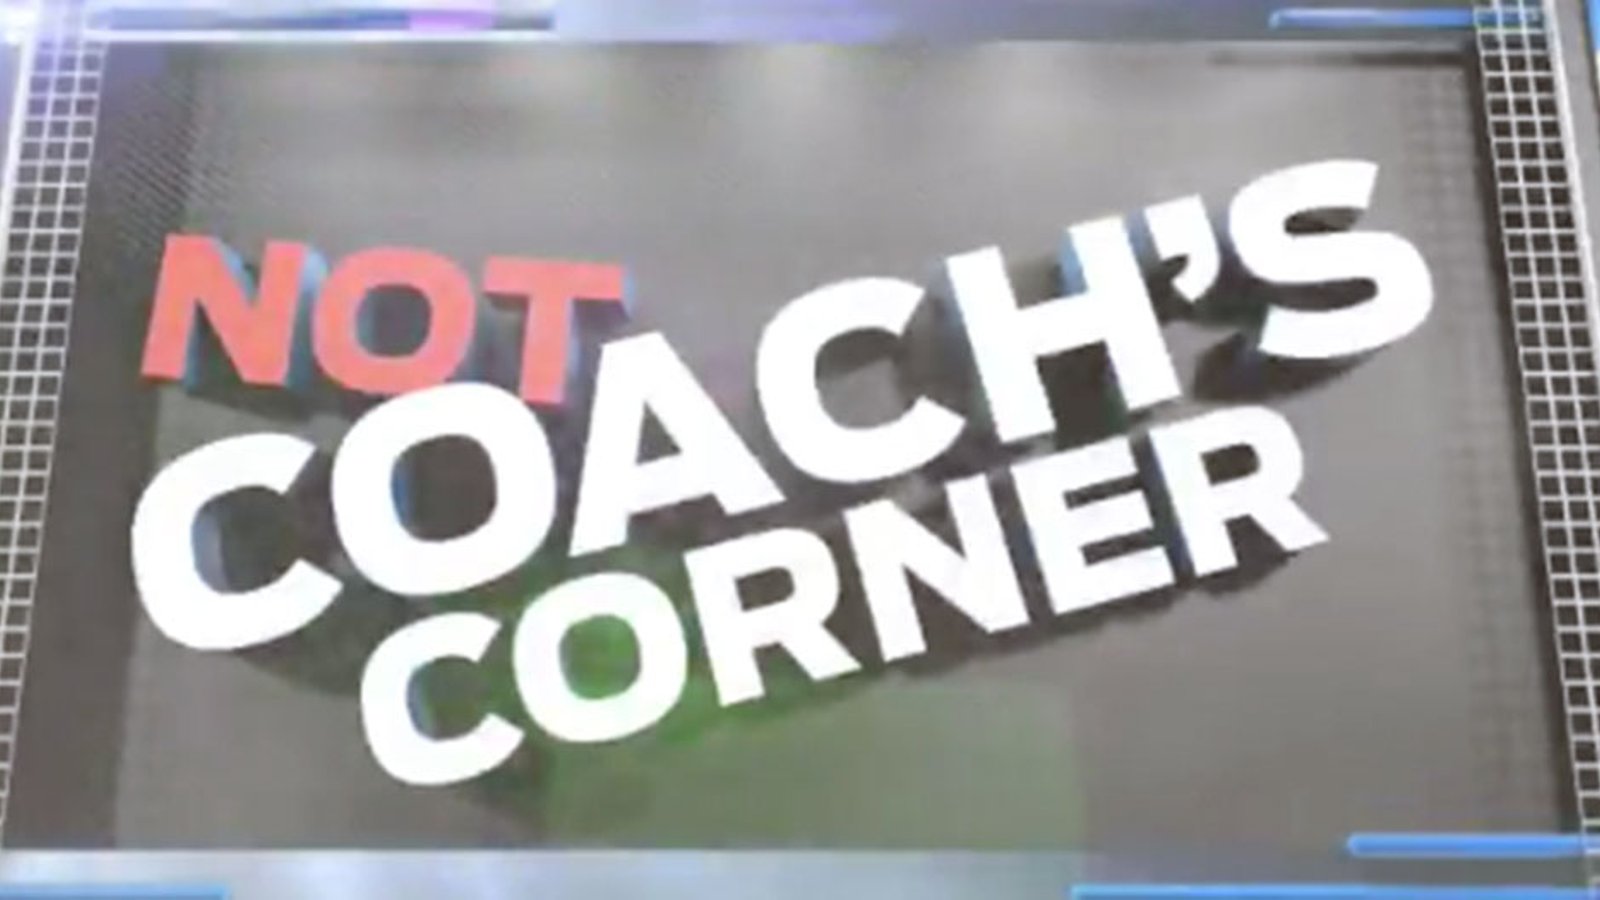 Kings take a shot at Don Cherry with new intermission segment called “Not Coaches Corner” 